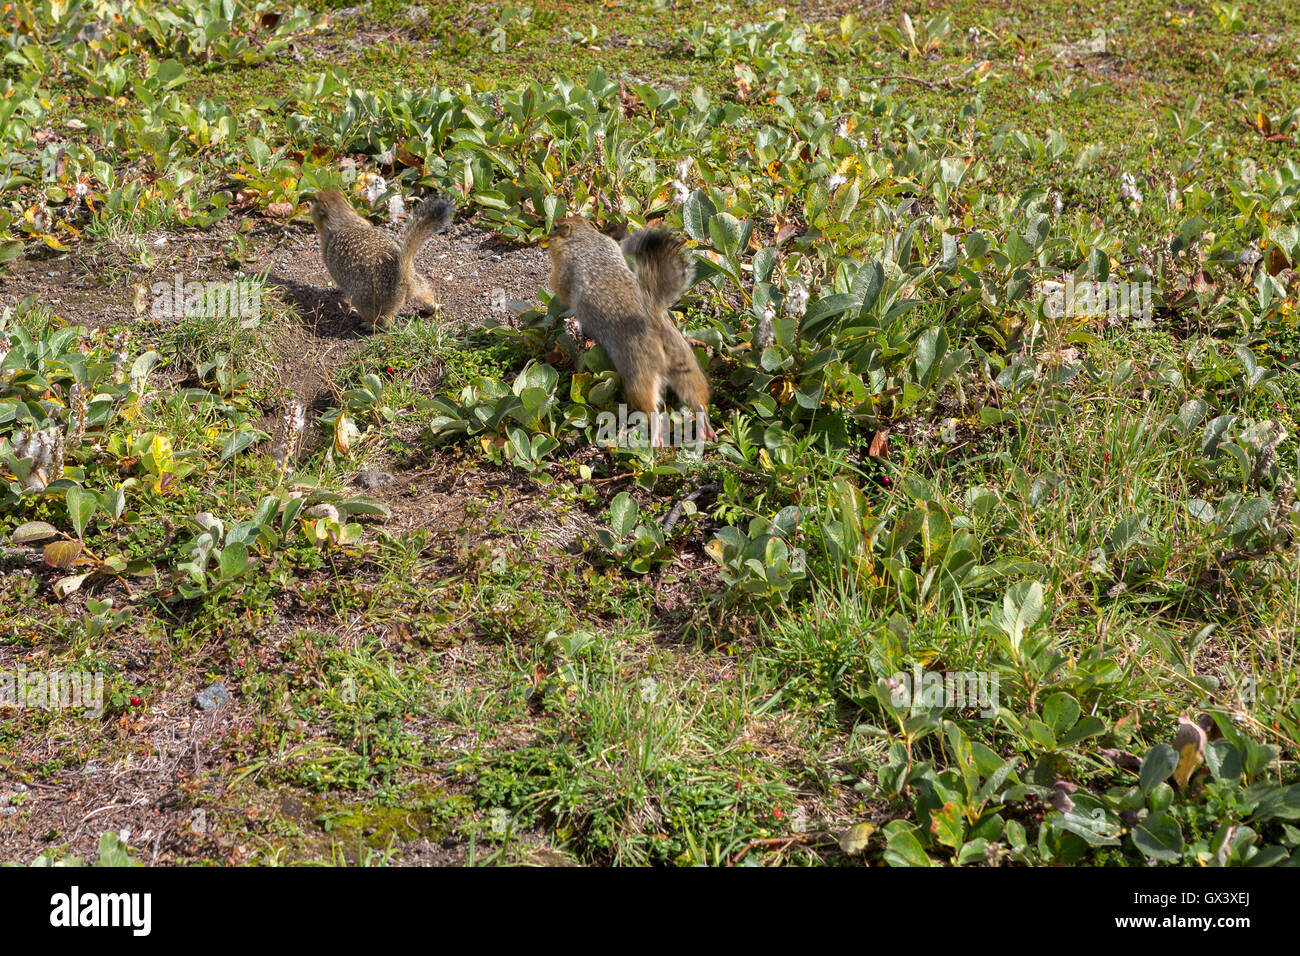 Arctic ground squirrel opponent banishes from its territory. Kamchatka. Stock Photo